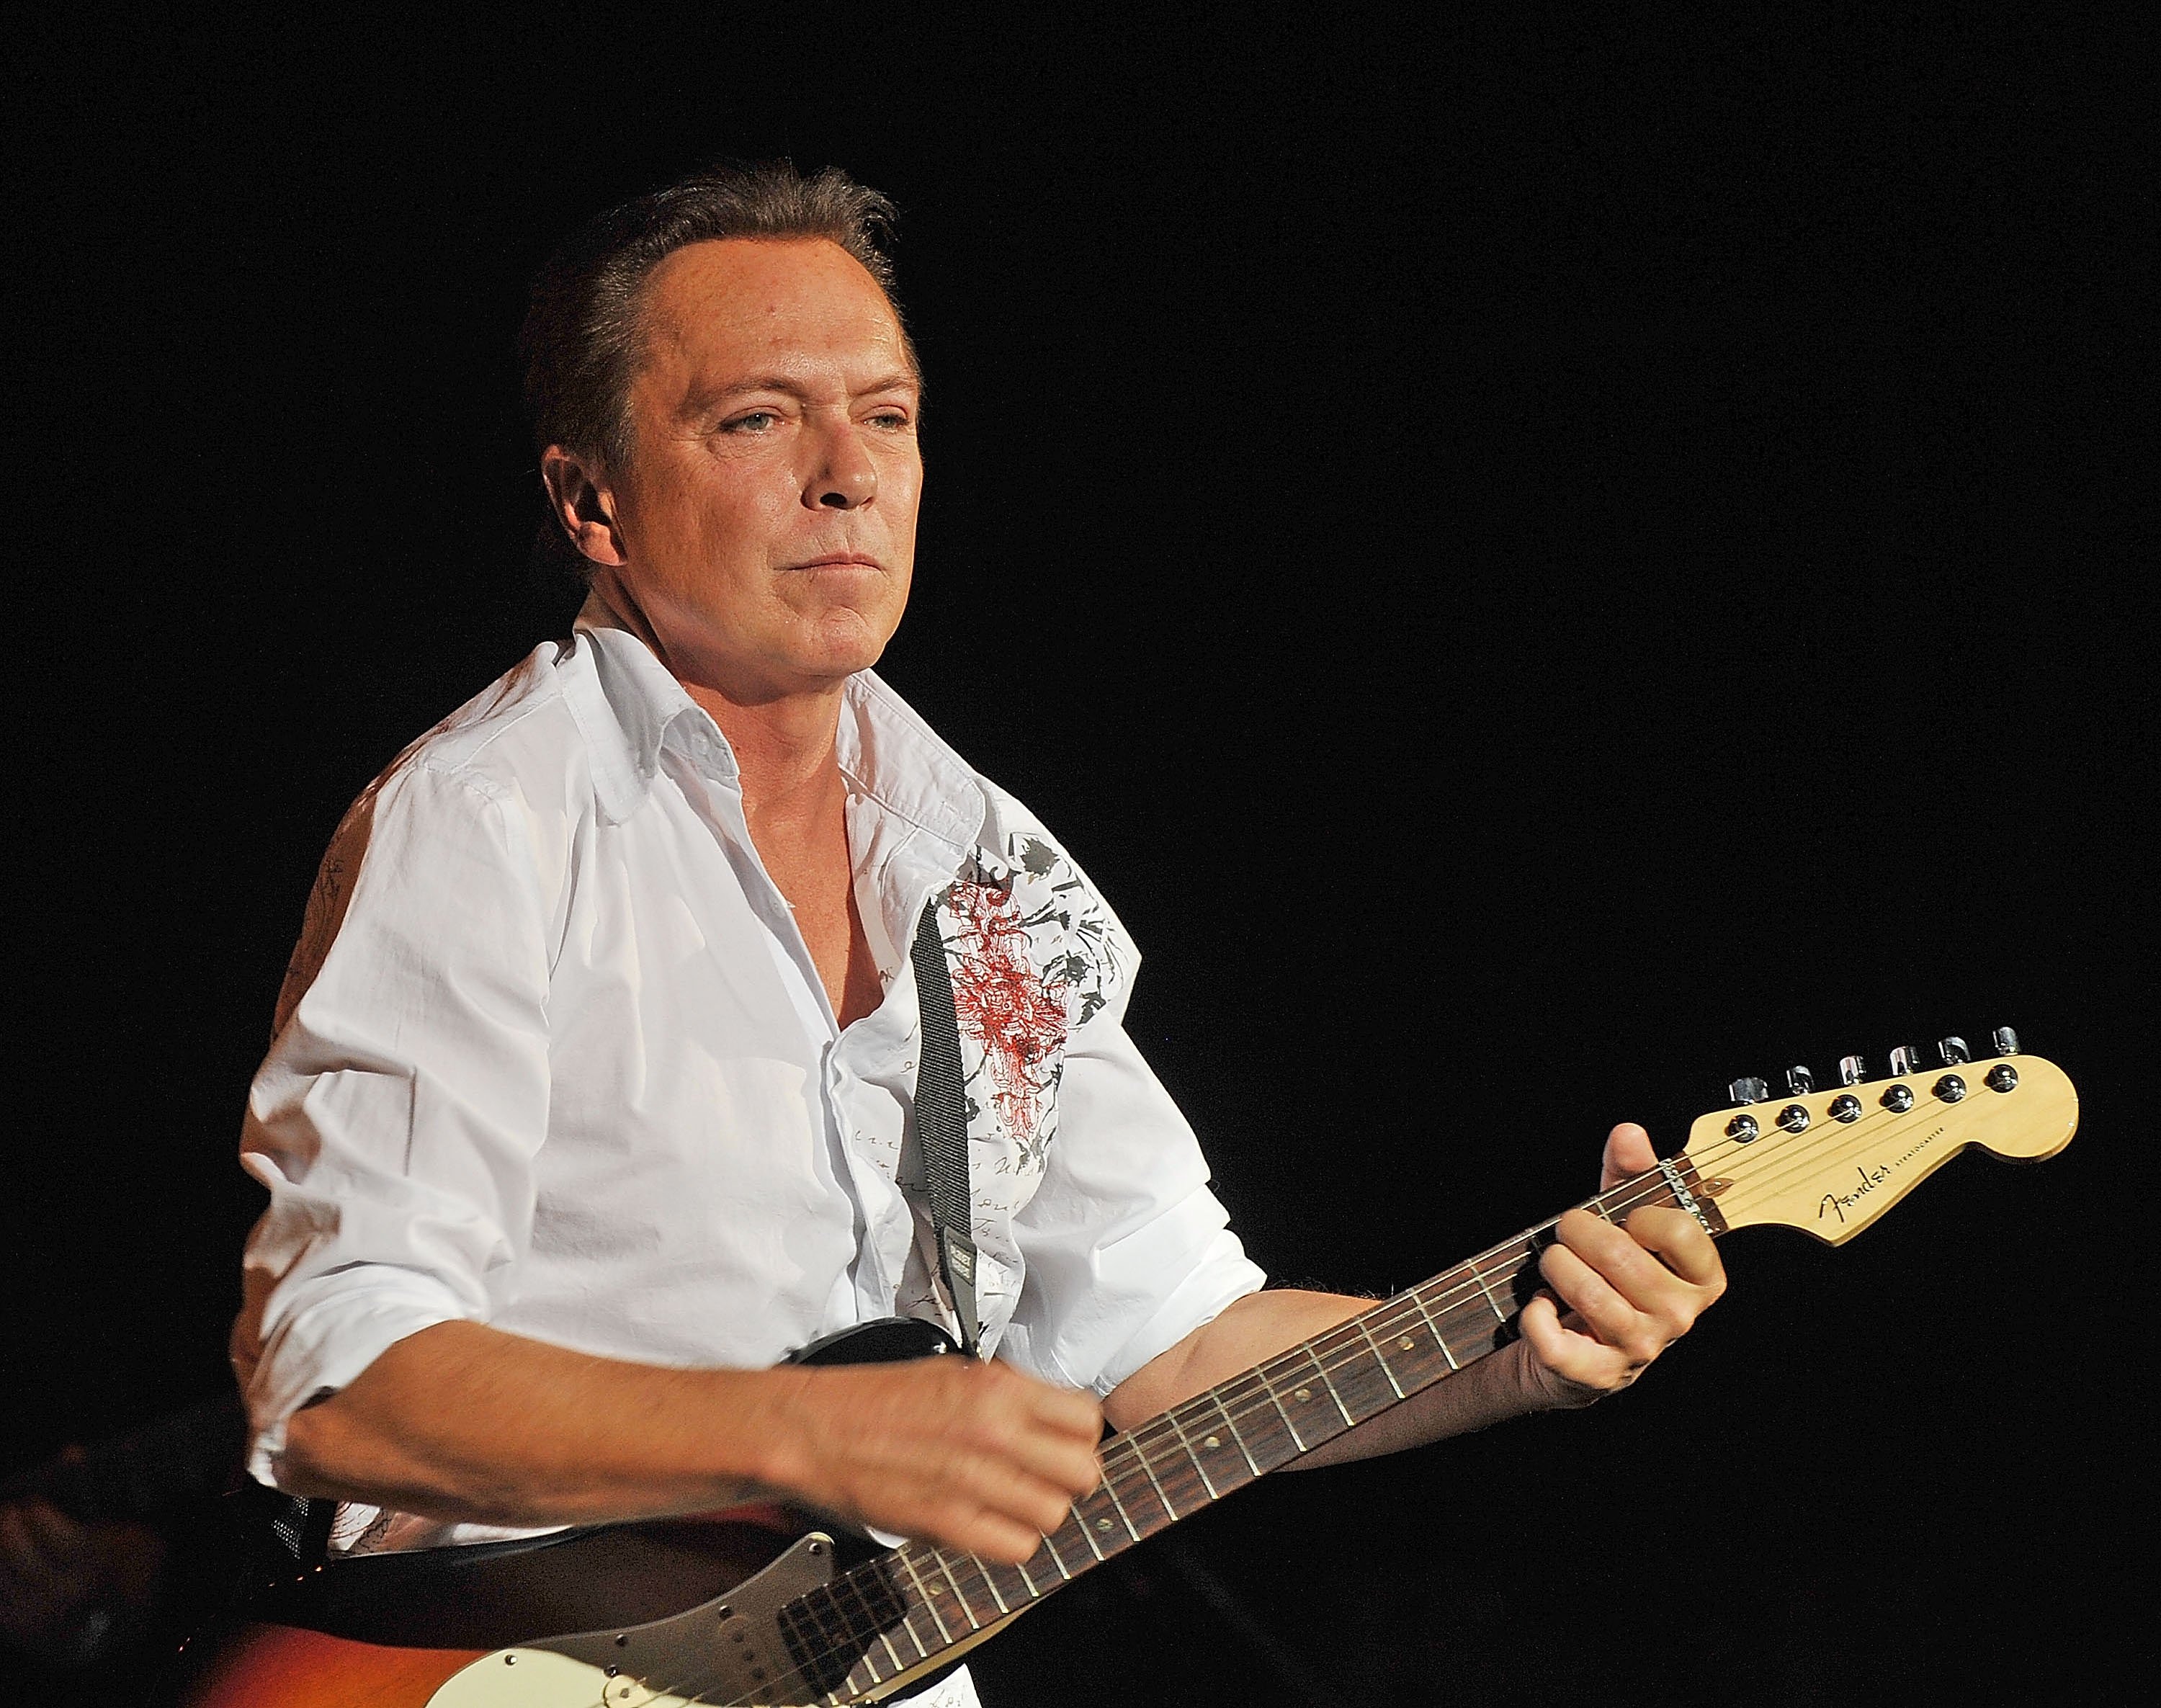 David Cassidy performs at the Queensborough Performing Arts Center in Queens on November 21, 2009, in New York City | Source: Getty Images